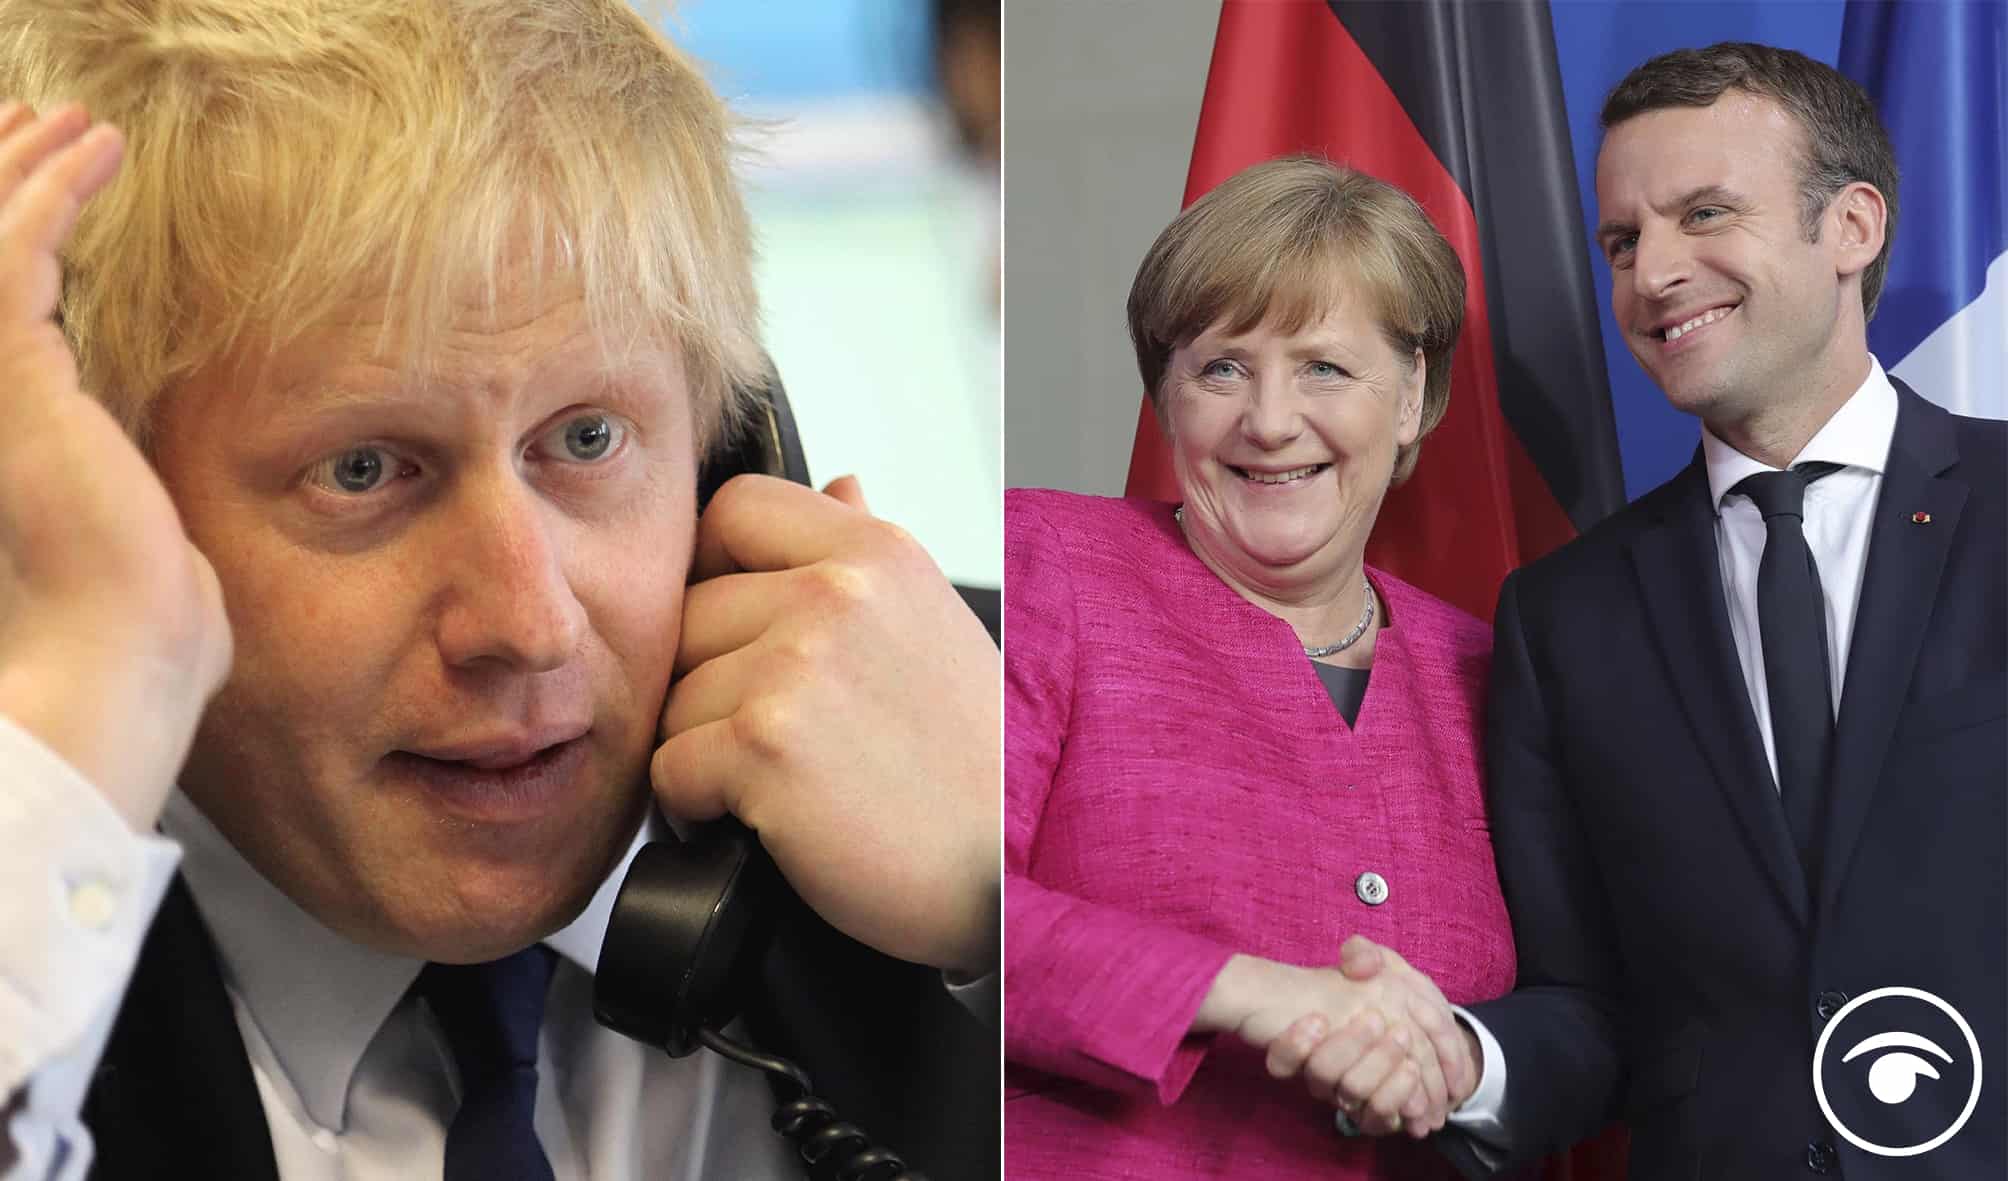 Not again! PM rebuffed in new bid to speak with Merkel and Macron over Brexit